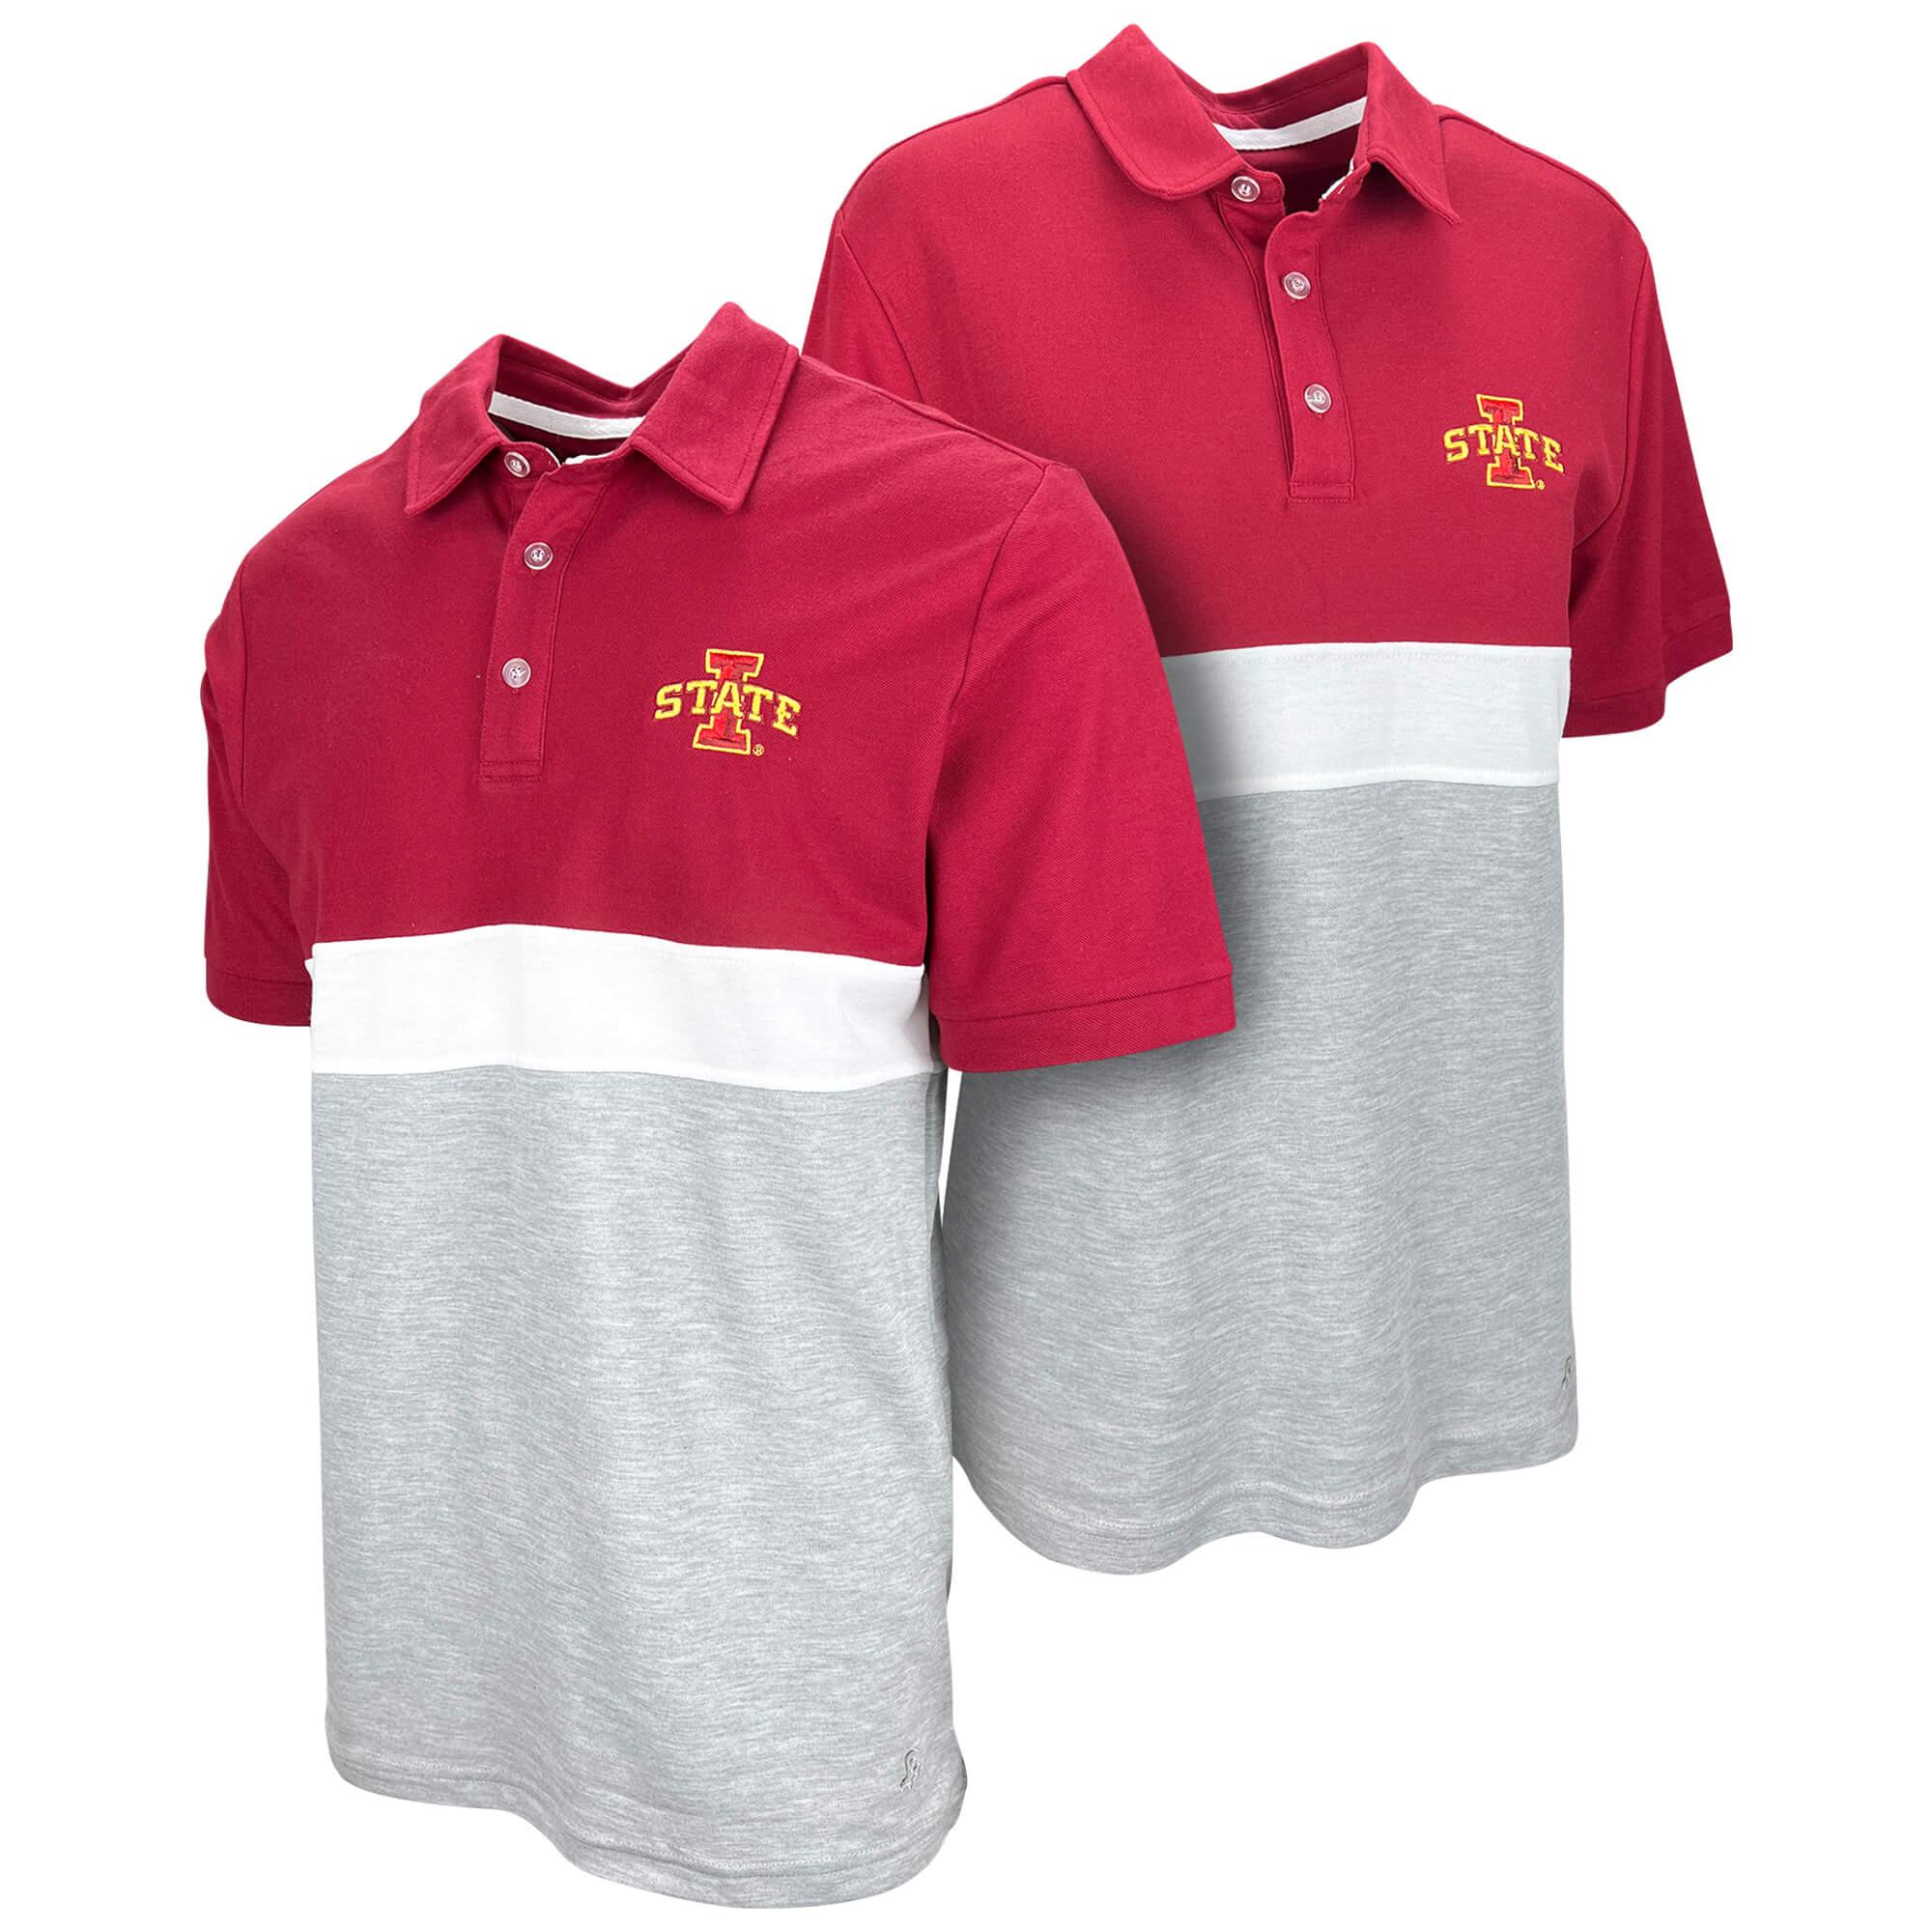 Authentic Brand I-State Cardinal and Gray Color Block Polo